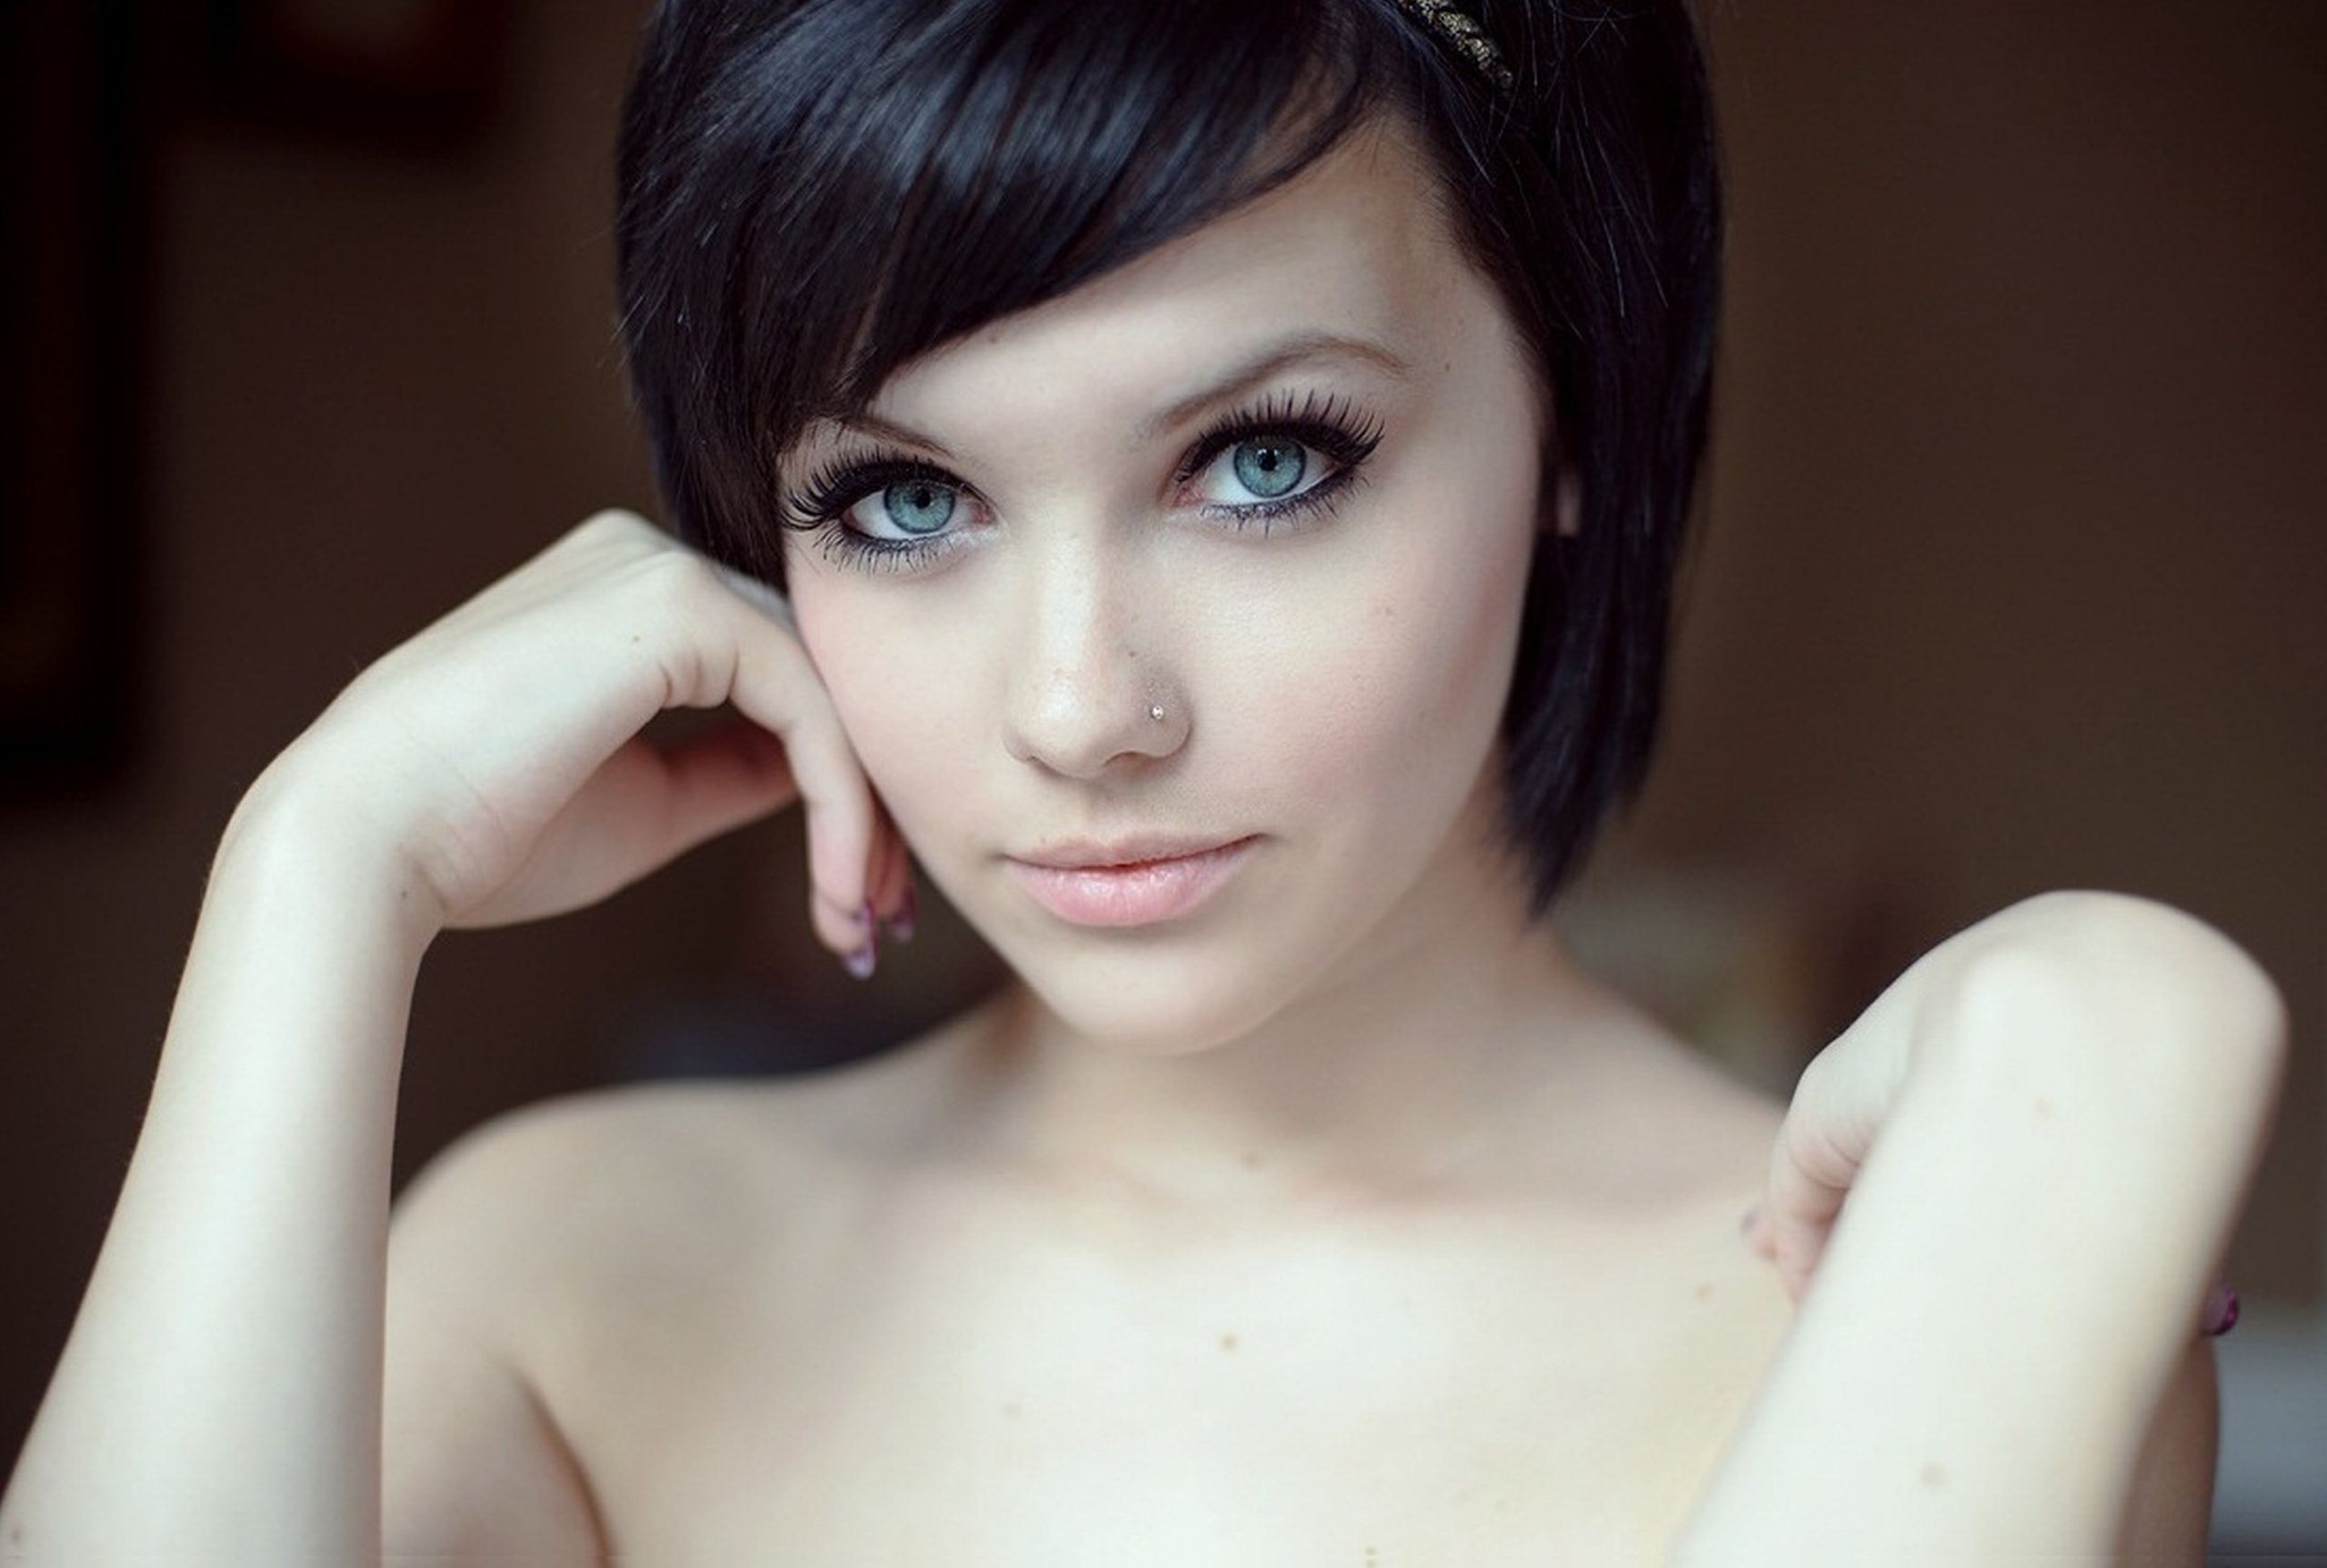 5. "Stunning woman with dark hair and piercing blue eyes" - wide 2